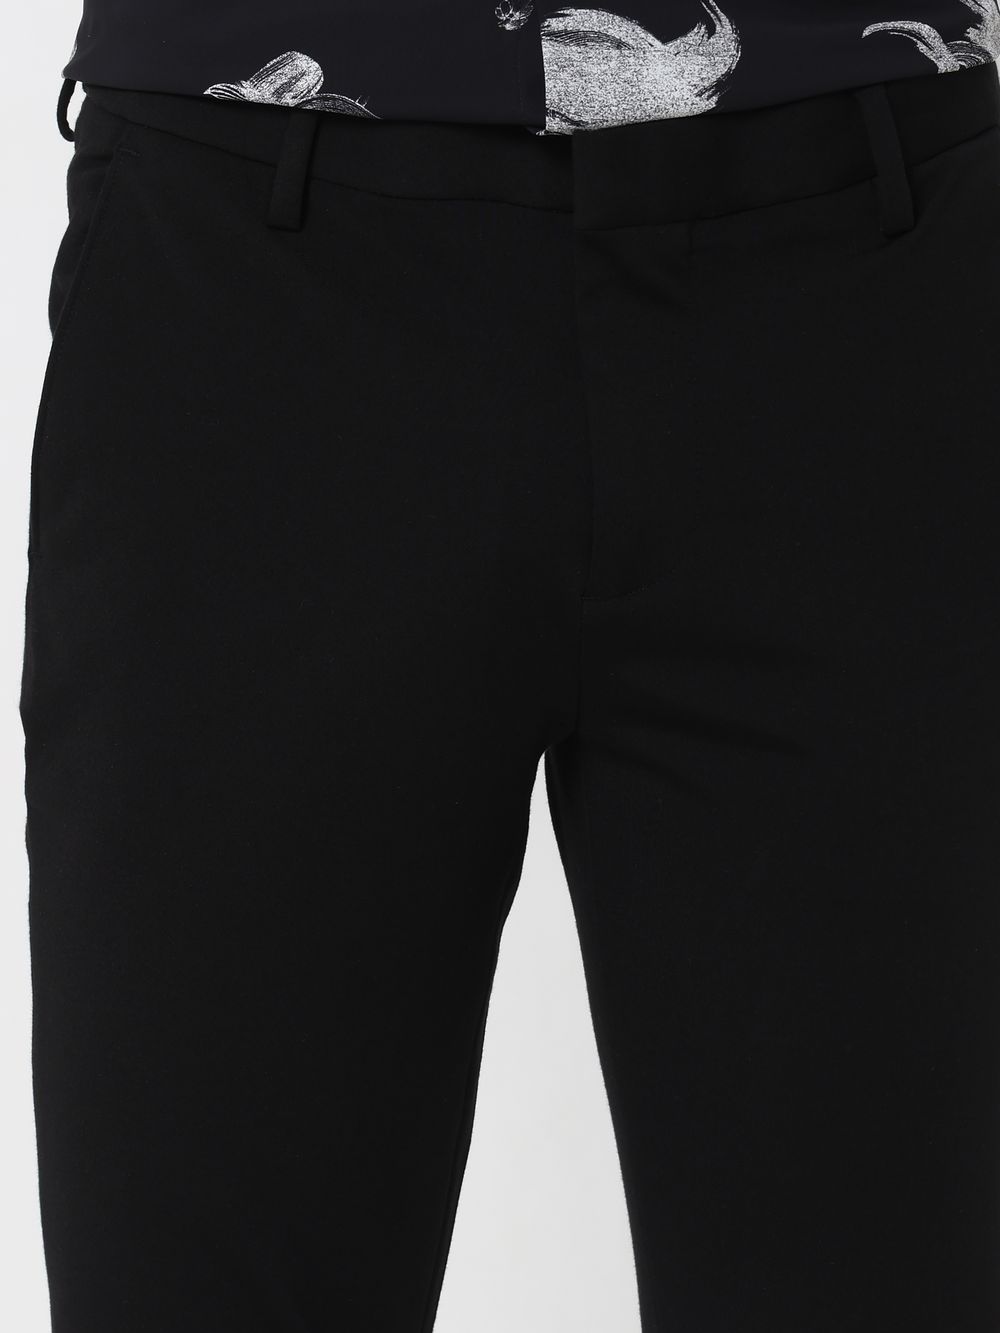 Black Ankle Length Stretch Chinos Trouser